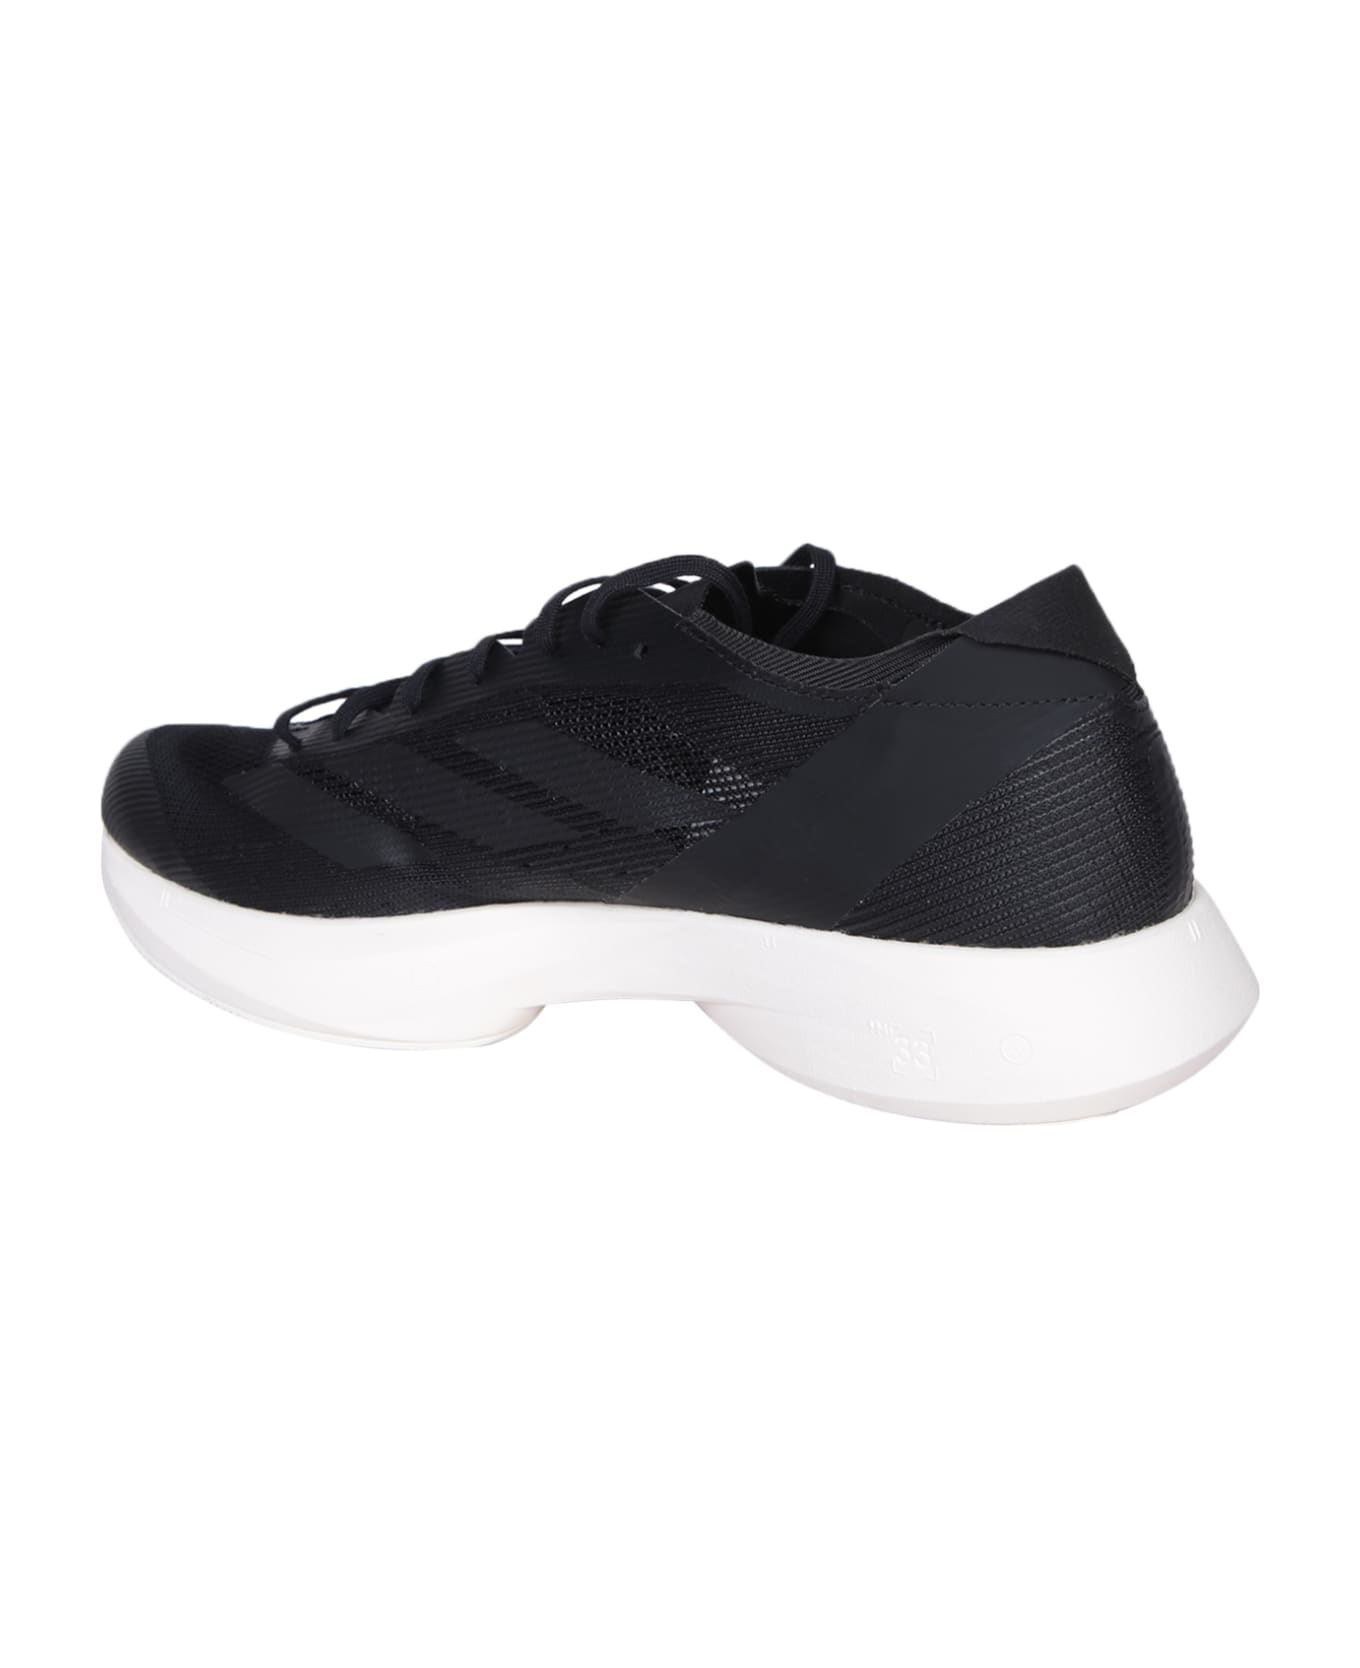 Y-3 Black Fabric Sneakers - Black Off White